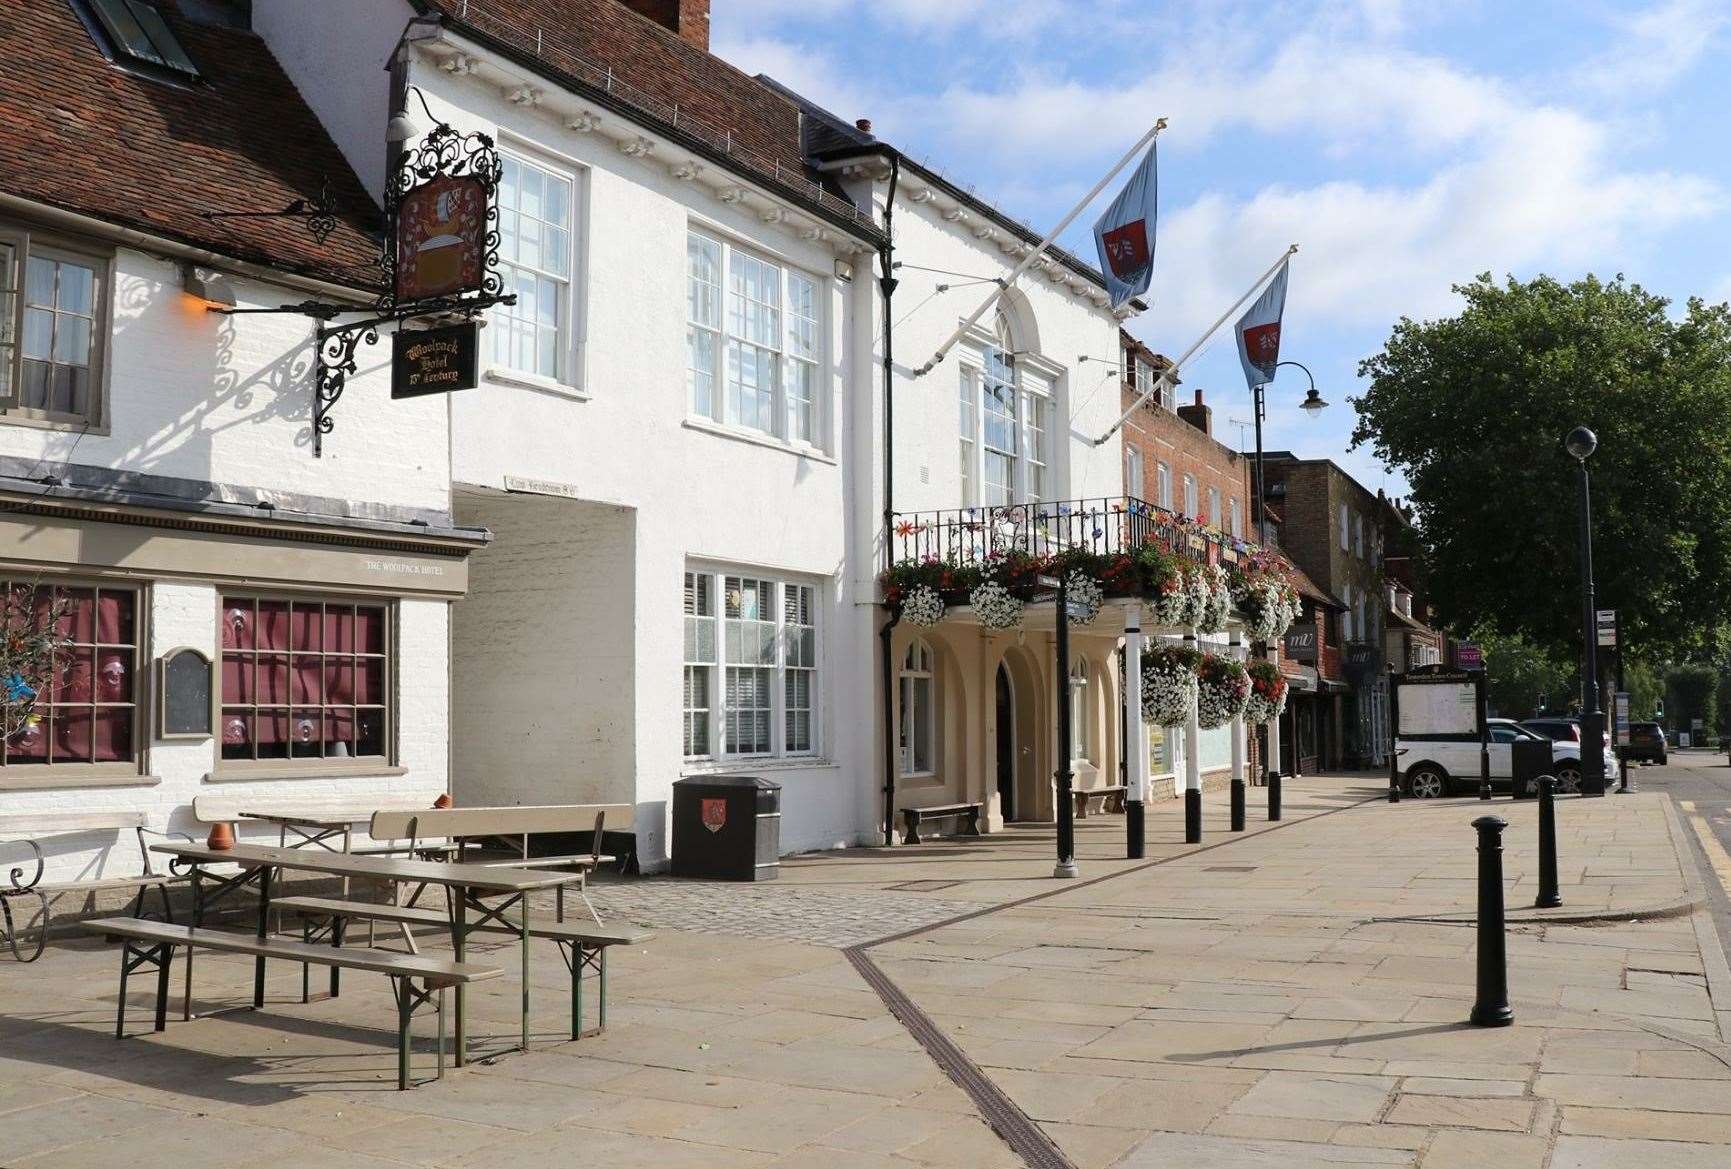 Tenterden Town Hall where the row took place